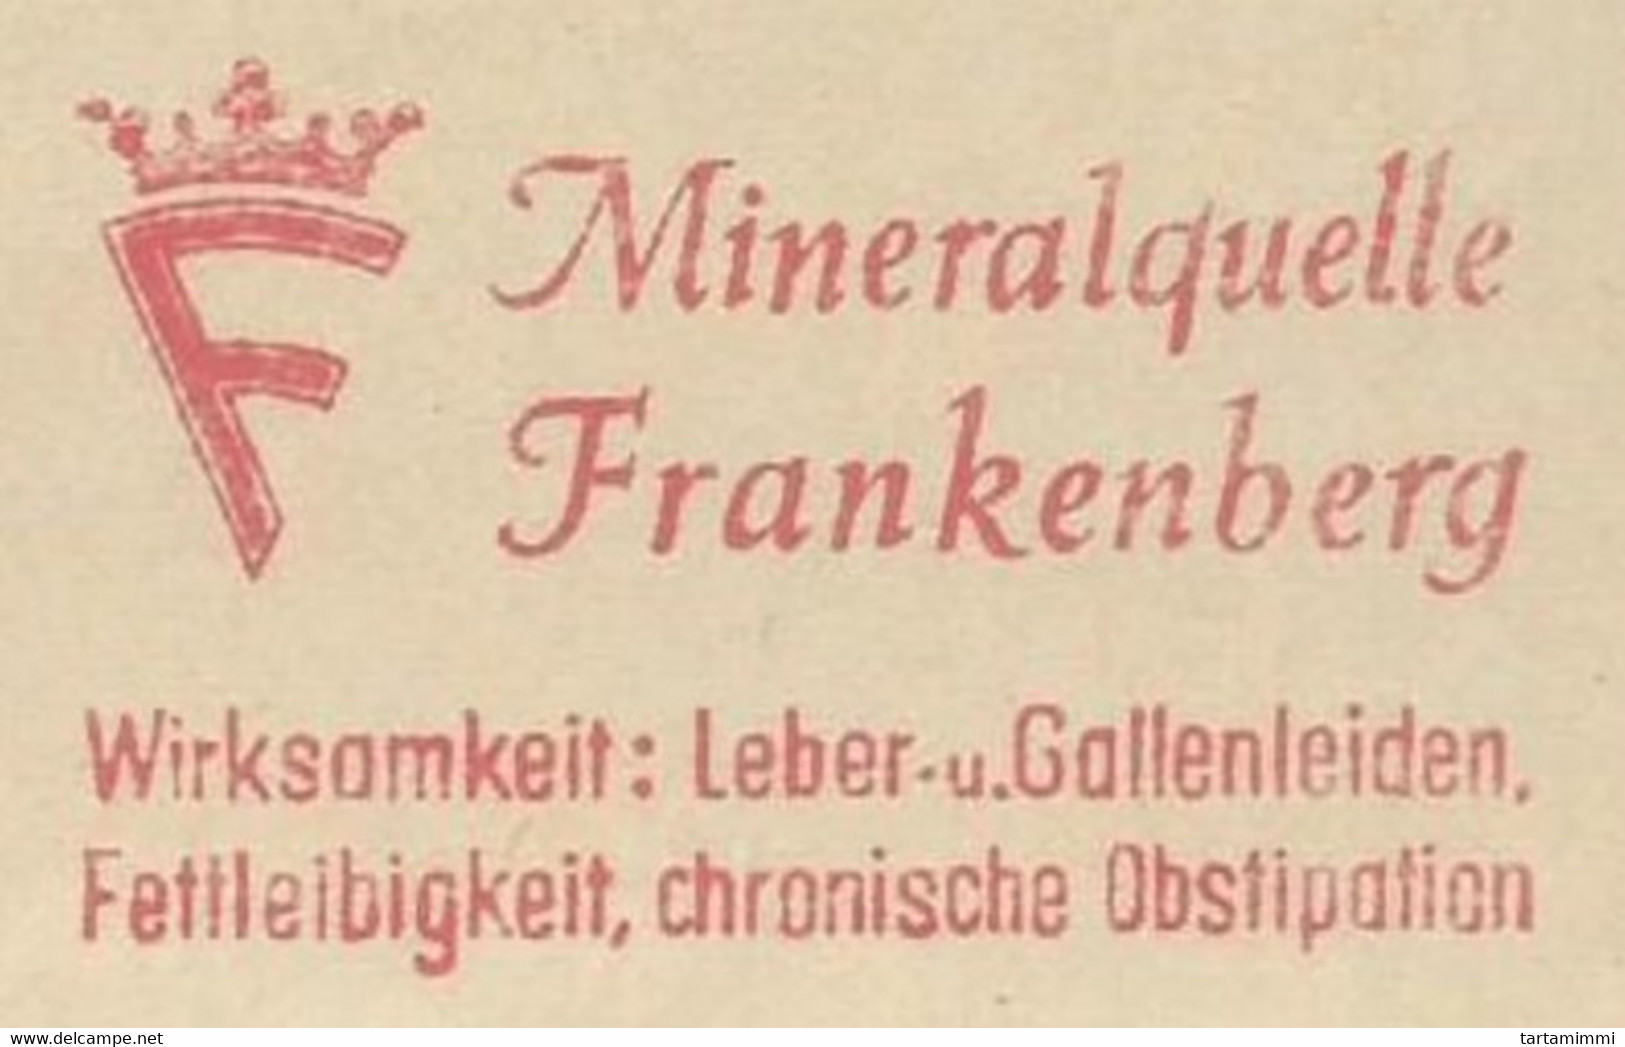 EMA METER STAMP FREISTEMPEL GERMANY 1963 MINERALQUELLE Naturally Springs That Produce Water-containing Minerals - Afstempelingen & Vlagstempels